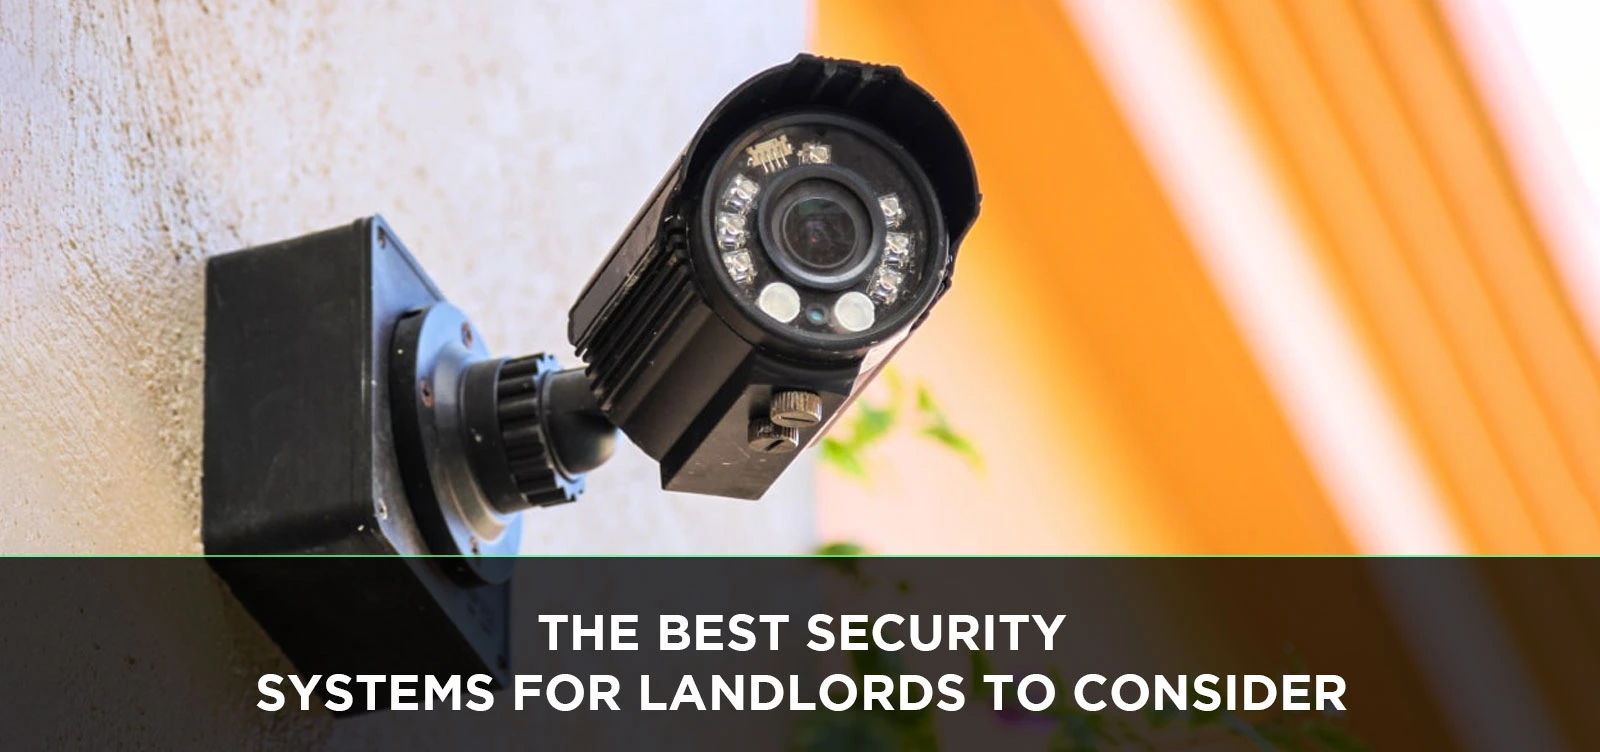 Security Systems for Landlords